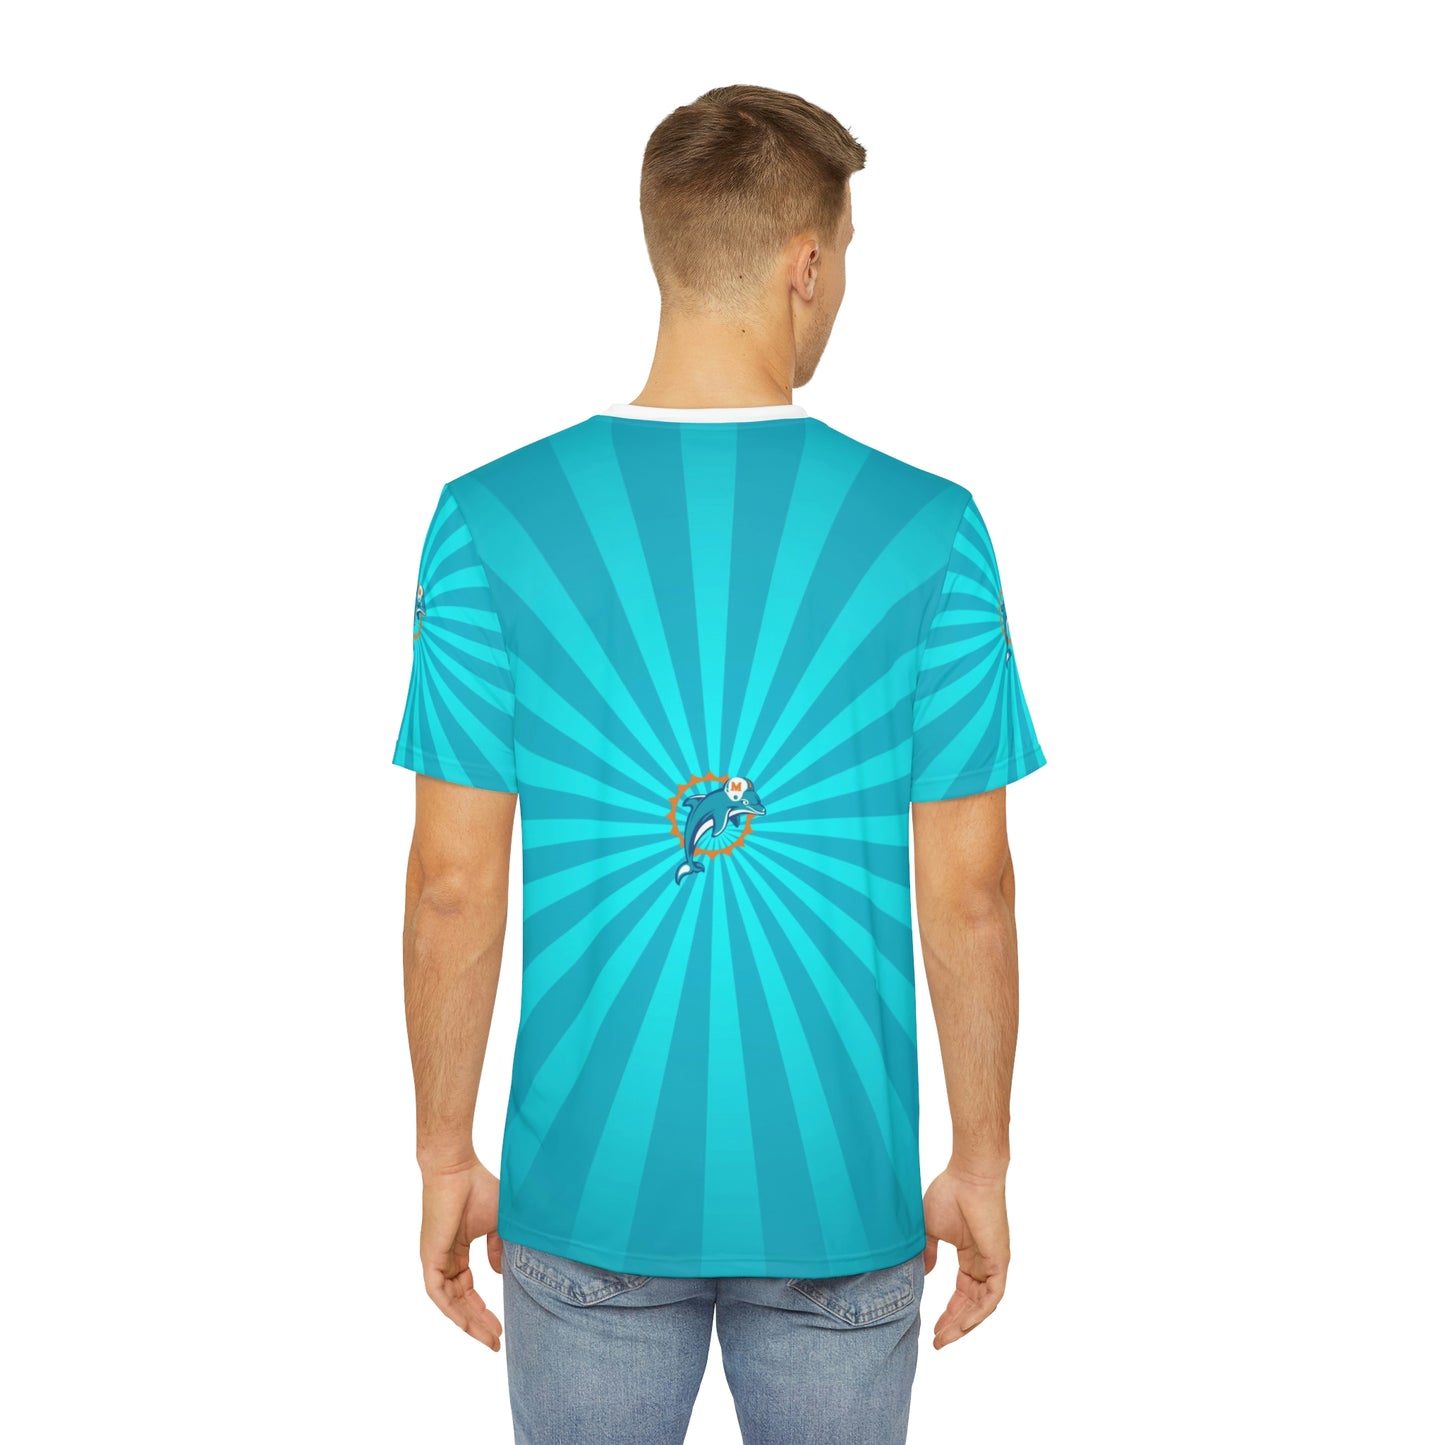 Geotrott NFL Miami Dolphins Men's Polyester All Over Print Tee T-Shirt